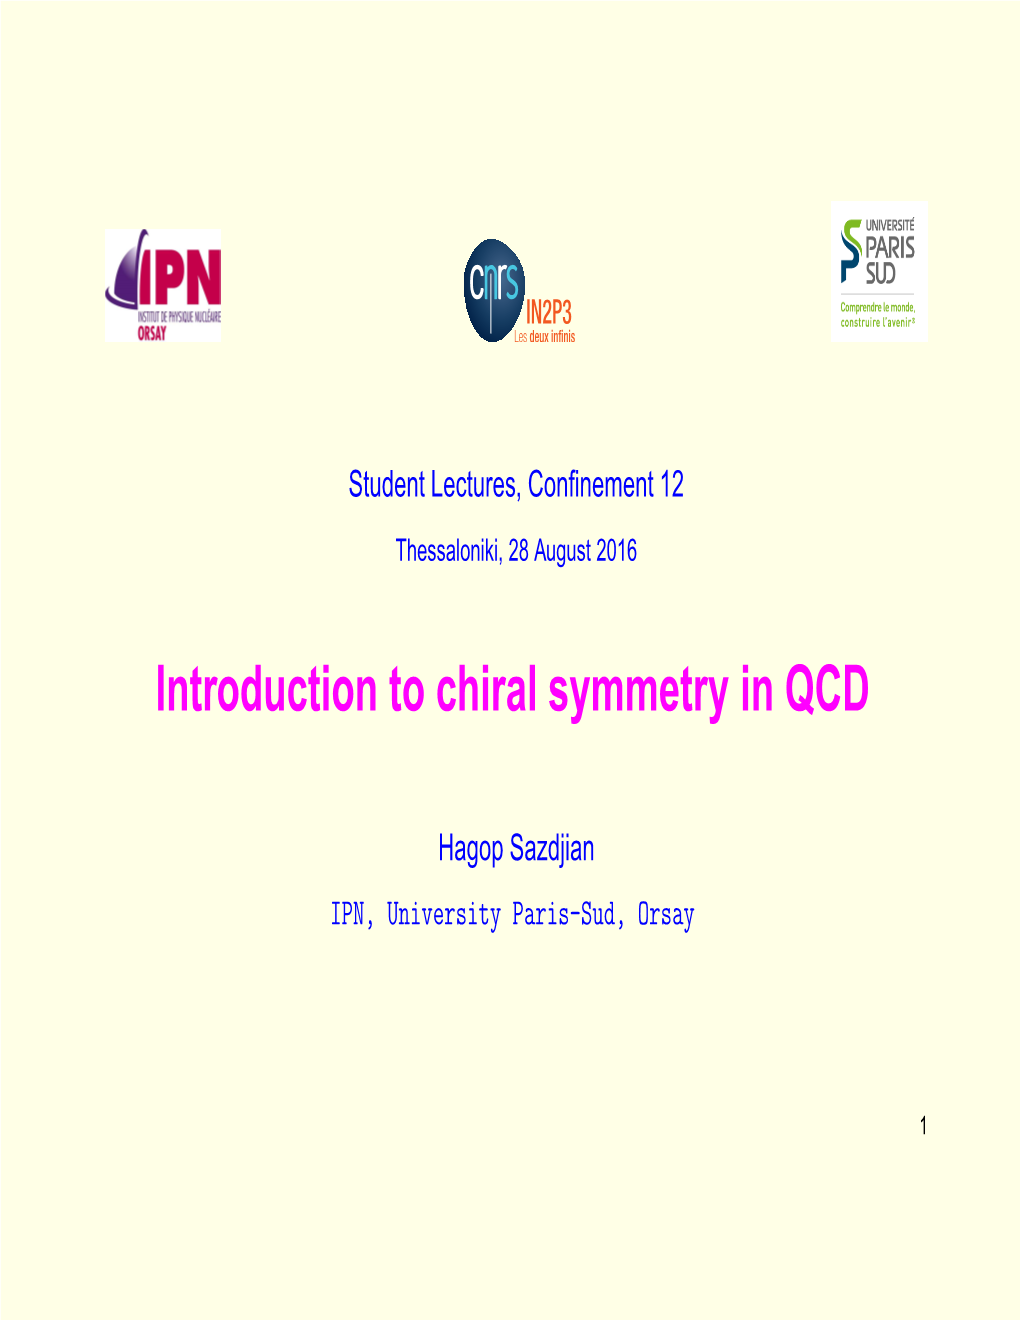 Introduction to Chiral Symmetry in QCD